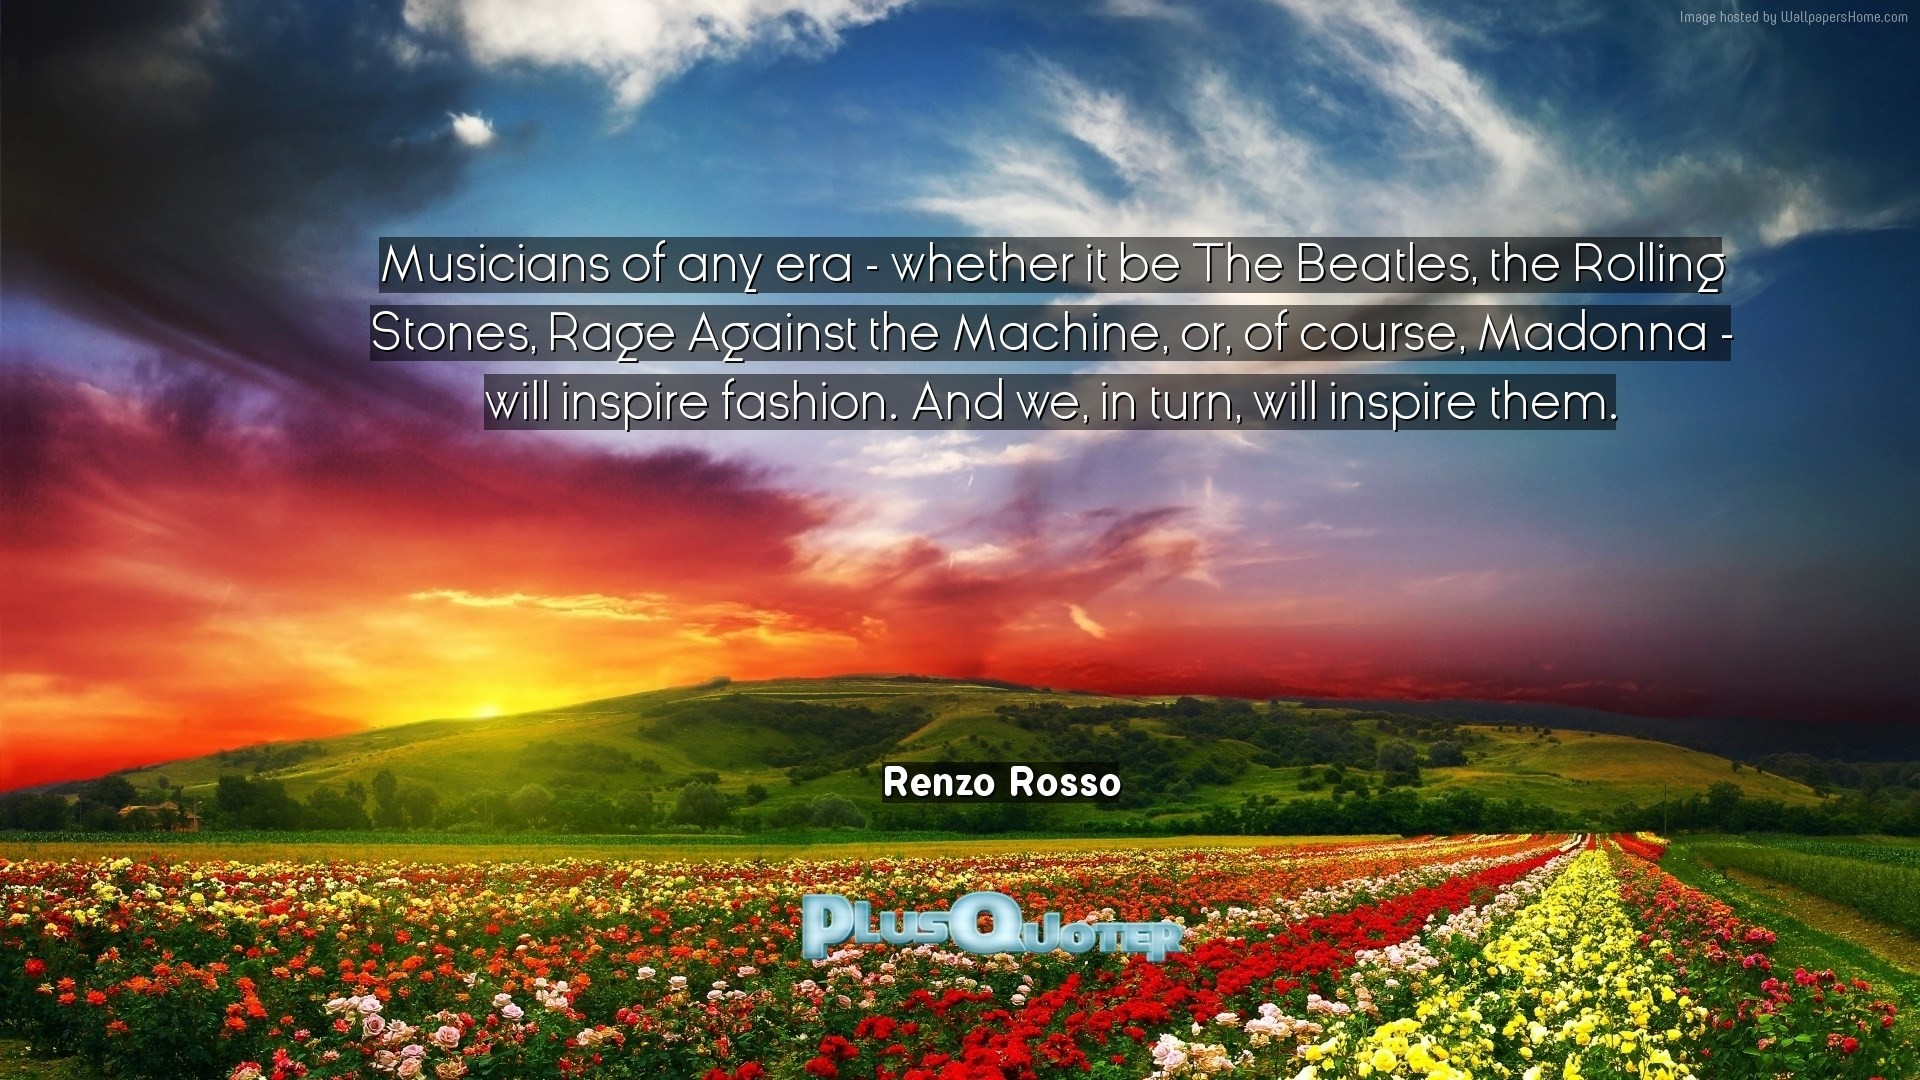 1920x1080 Download Wallpaper with inspirational Quotes- "Musicians of any era -  whether it be The